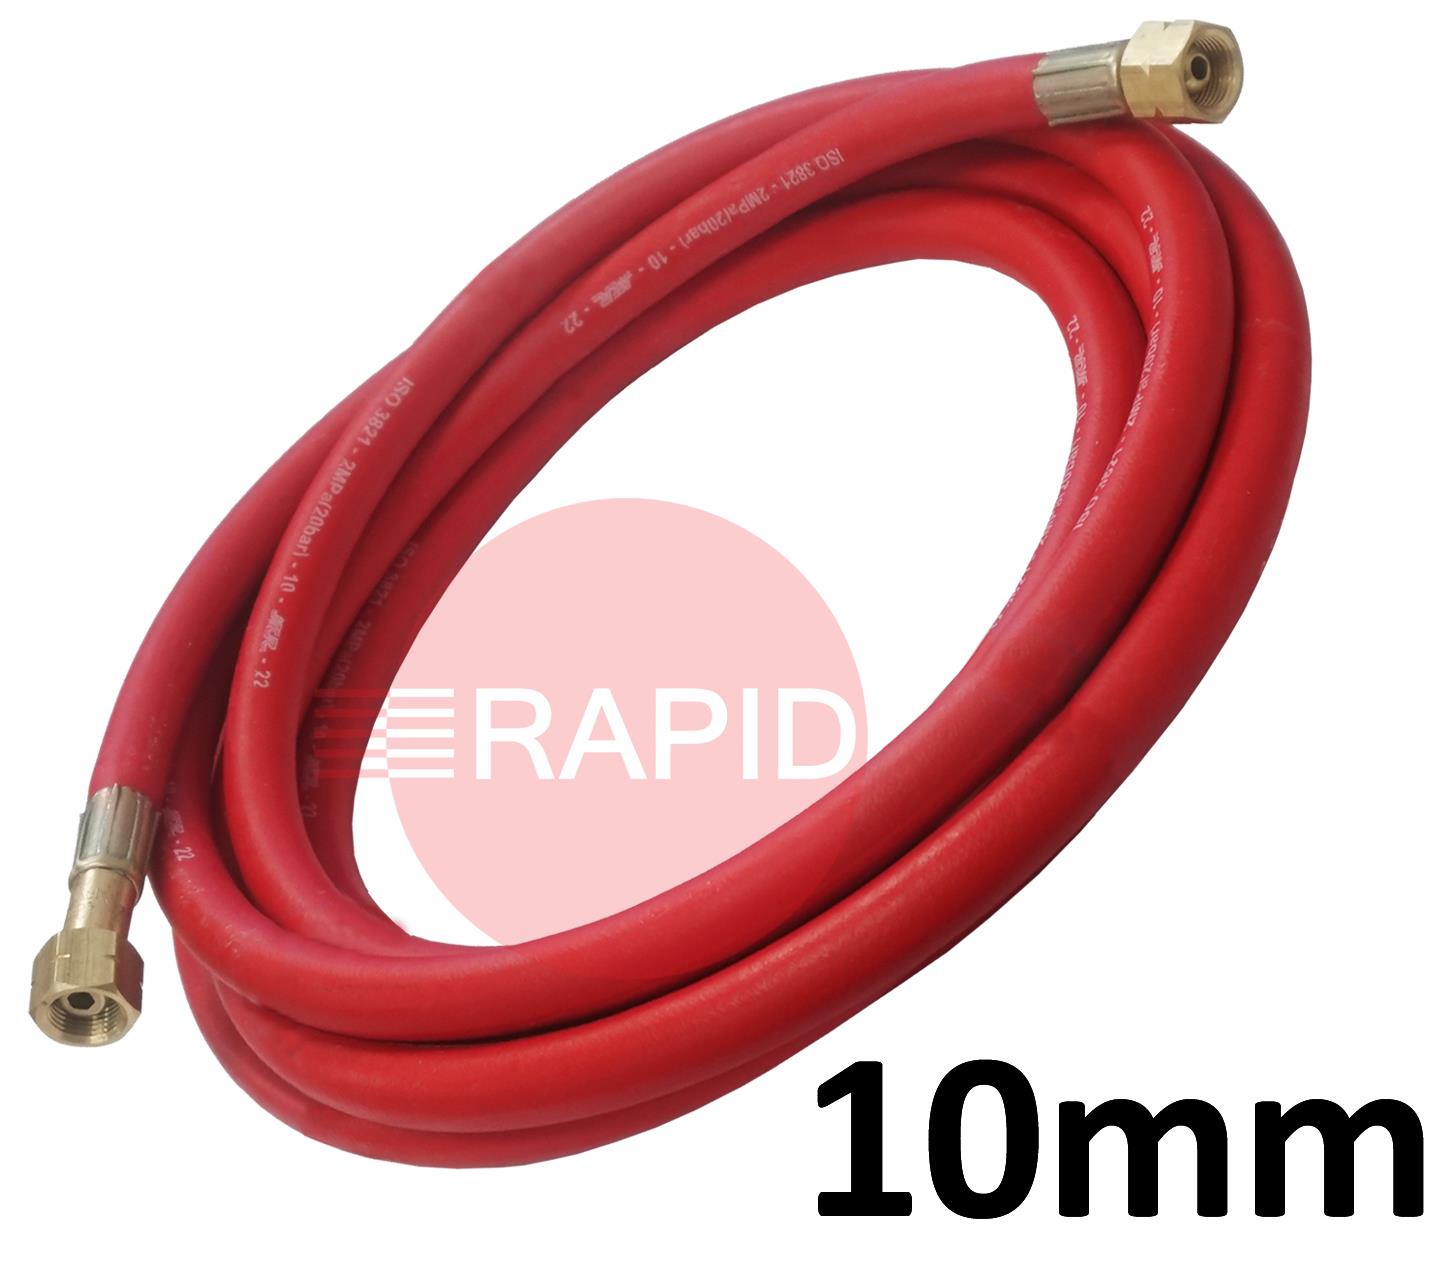 A5129  Fitted Acetylene Hose. 10mm Bore. G3/8 Check Valve & G3/8 Regulator Connection - 5m